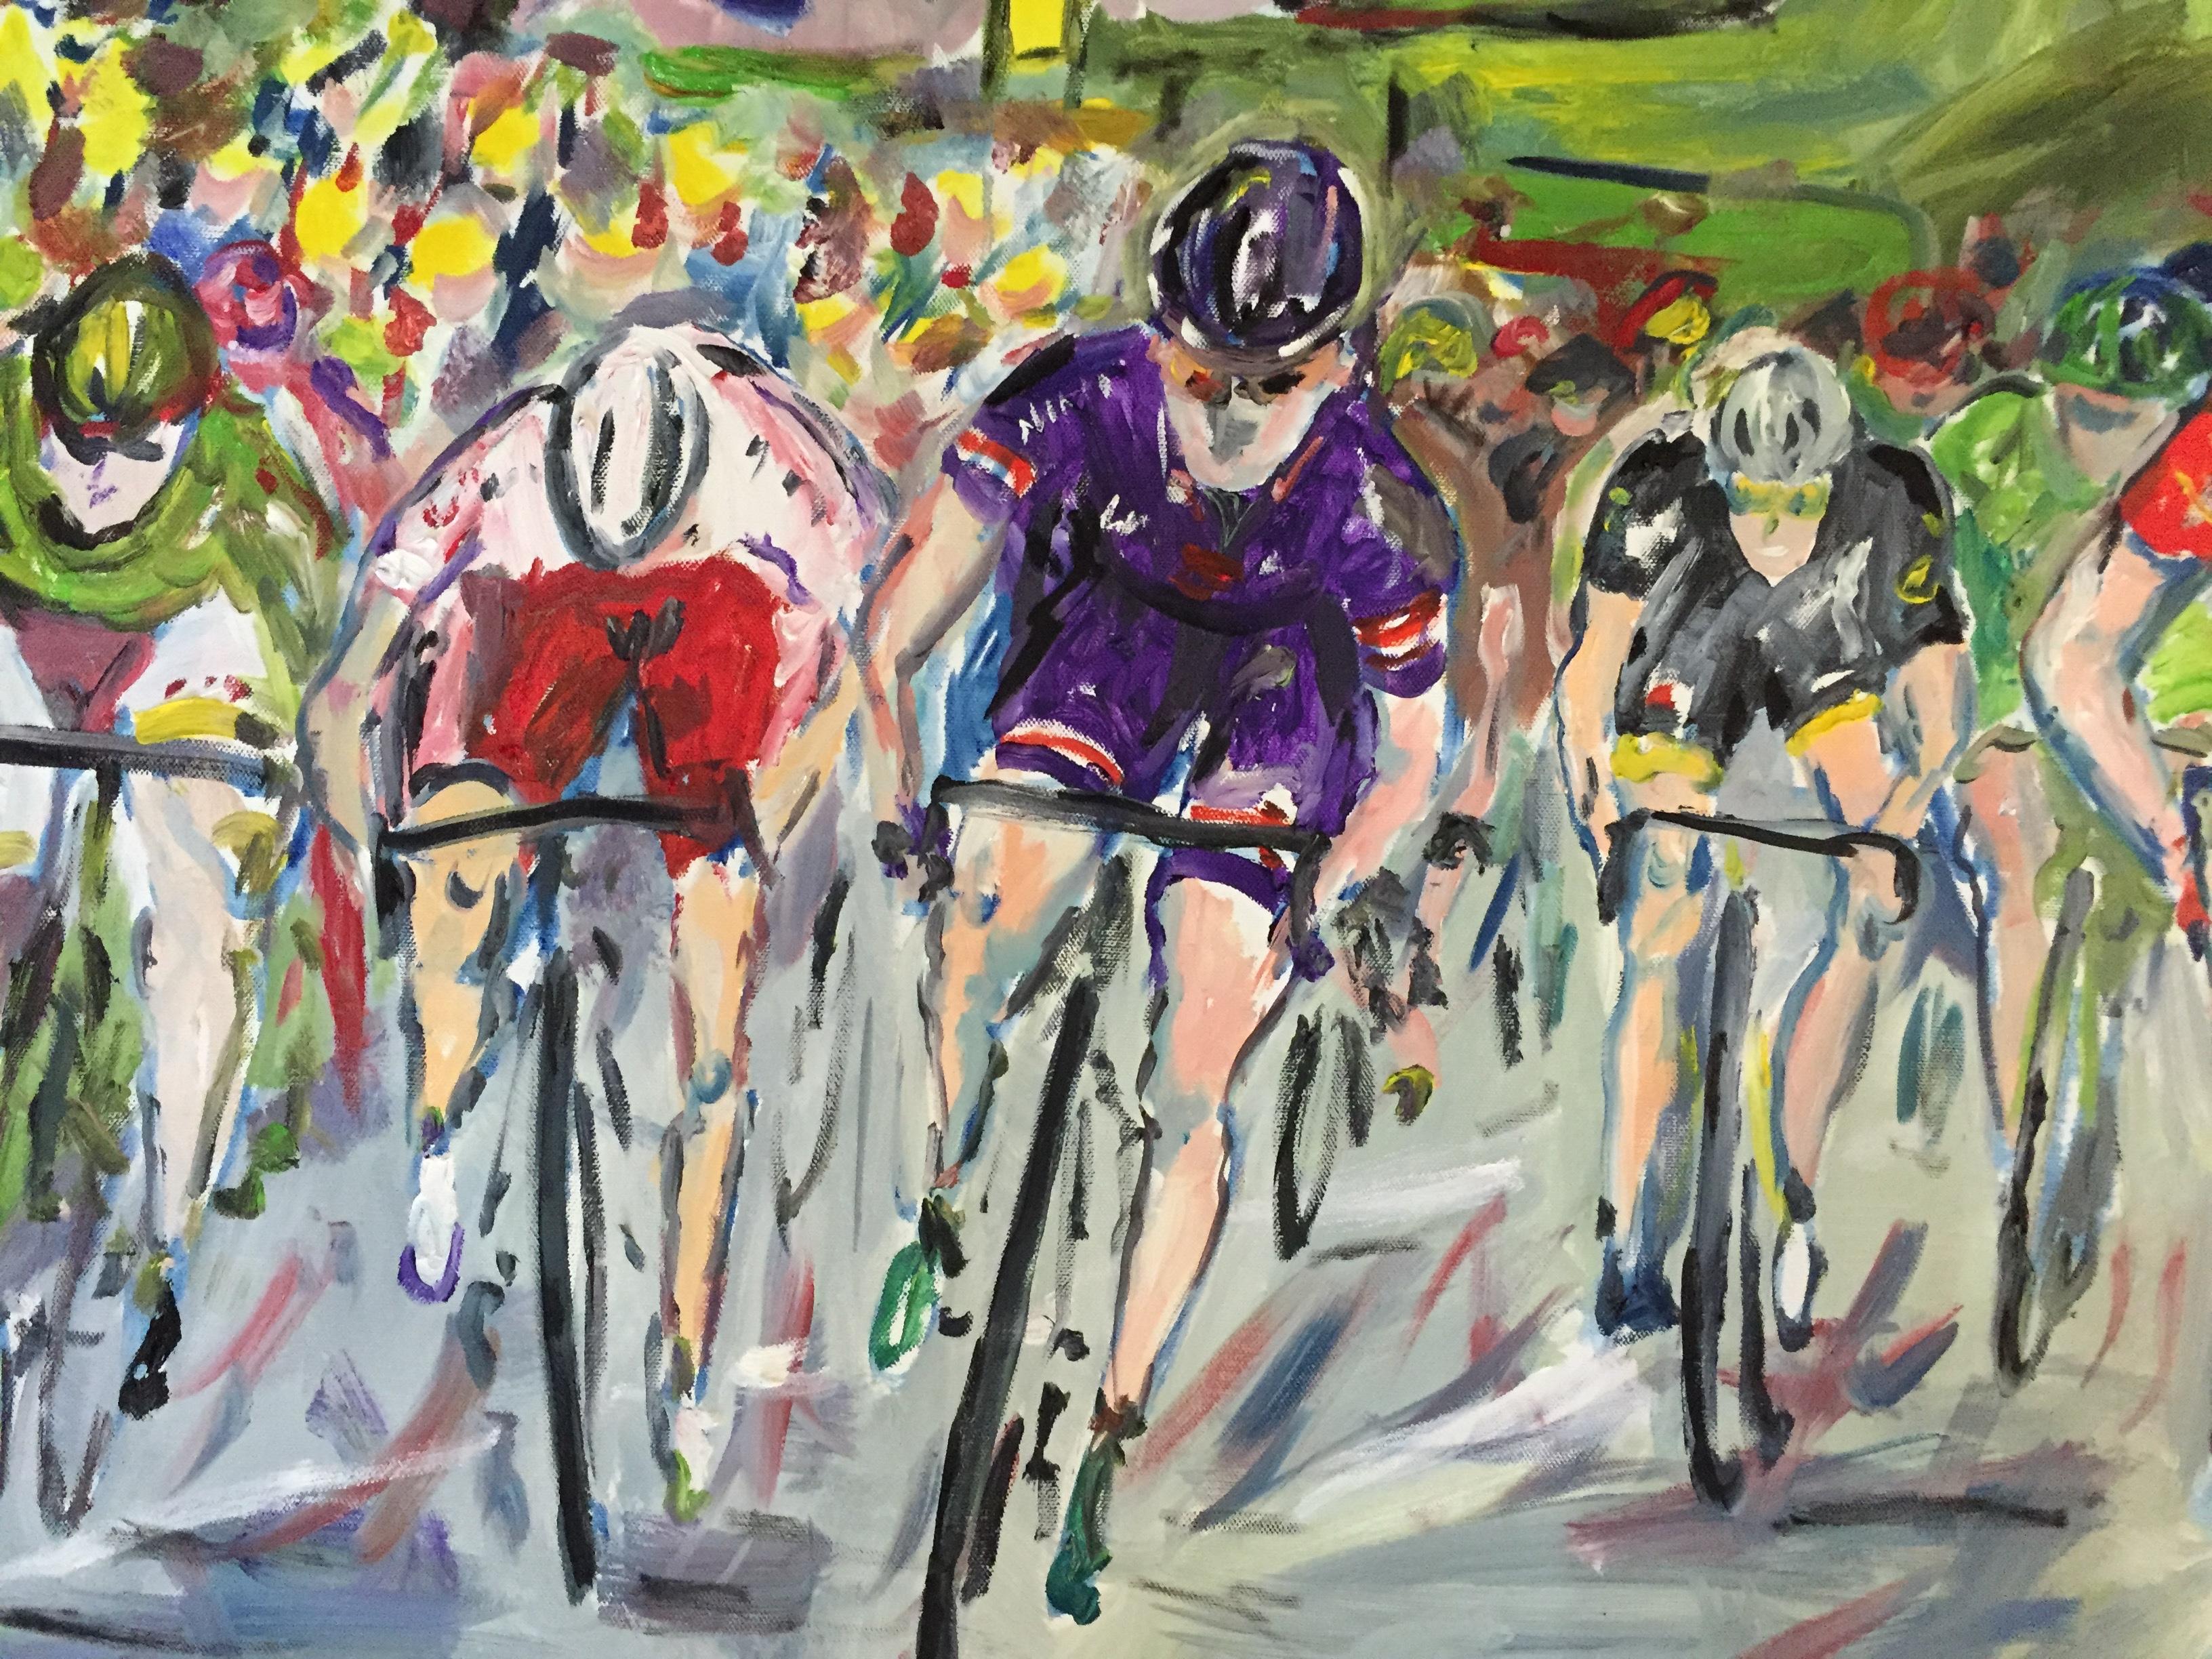 The Final Sprint - Tour de France Stage 15 2015, bicycle art, affordable art - Contemporary Painting by Gareth Bayley